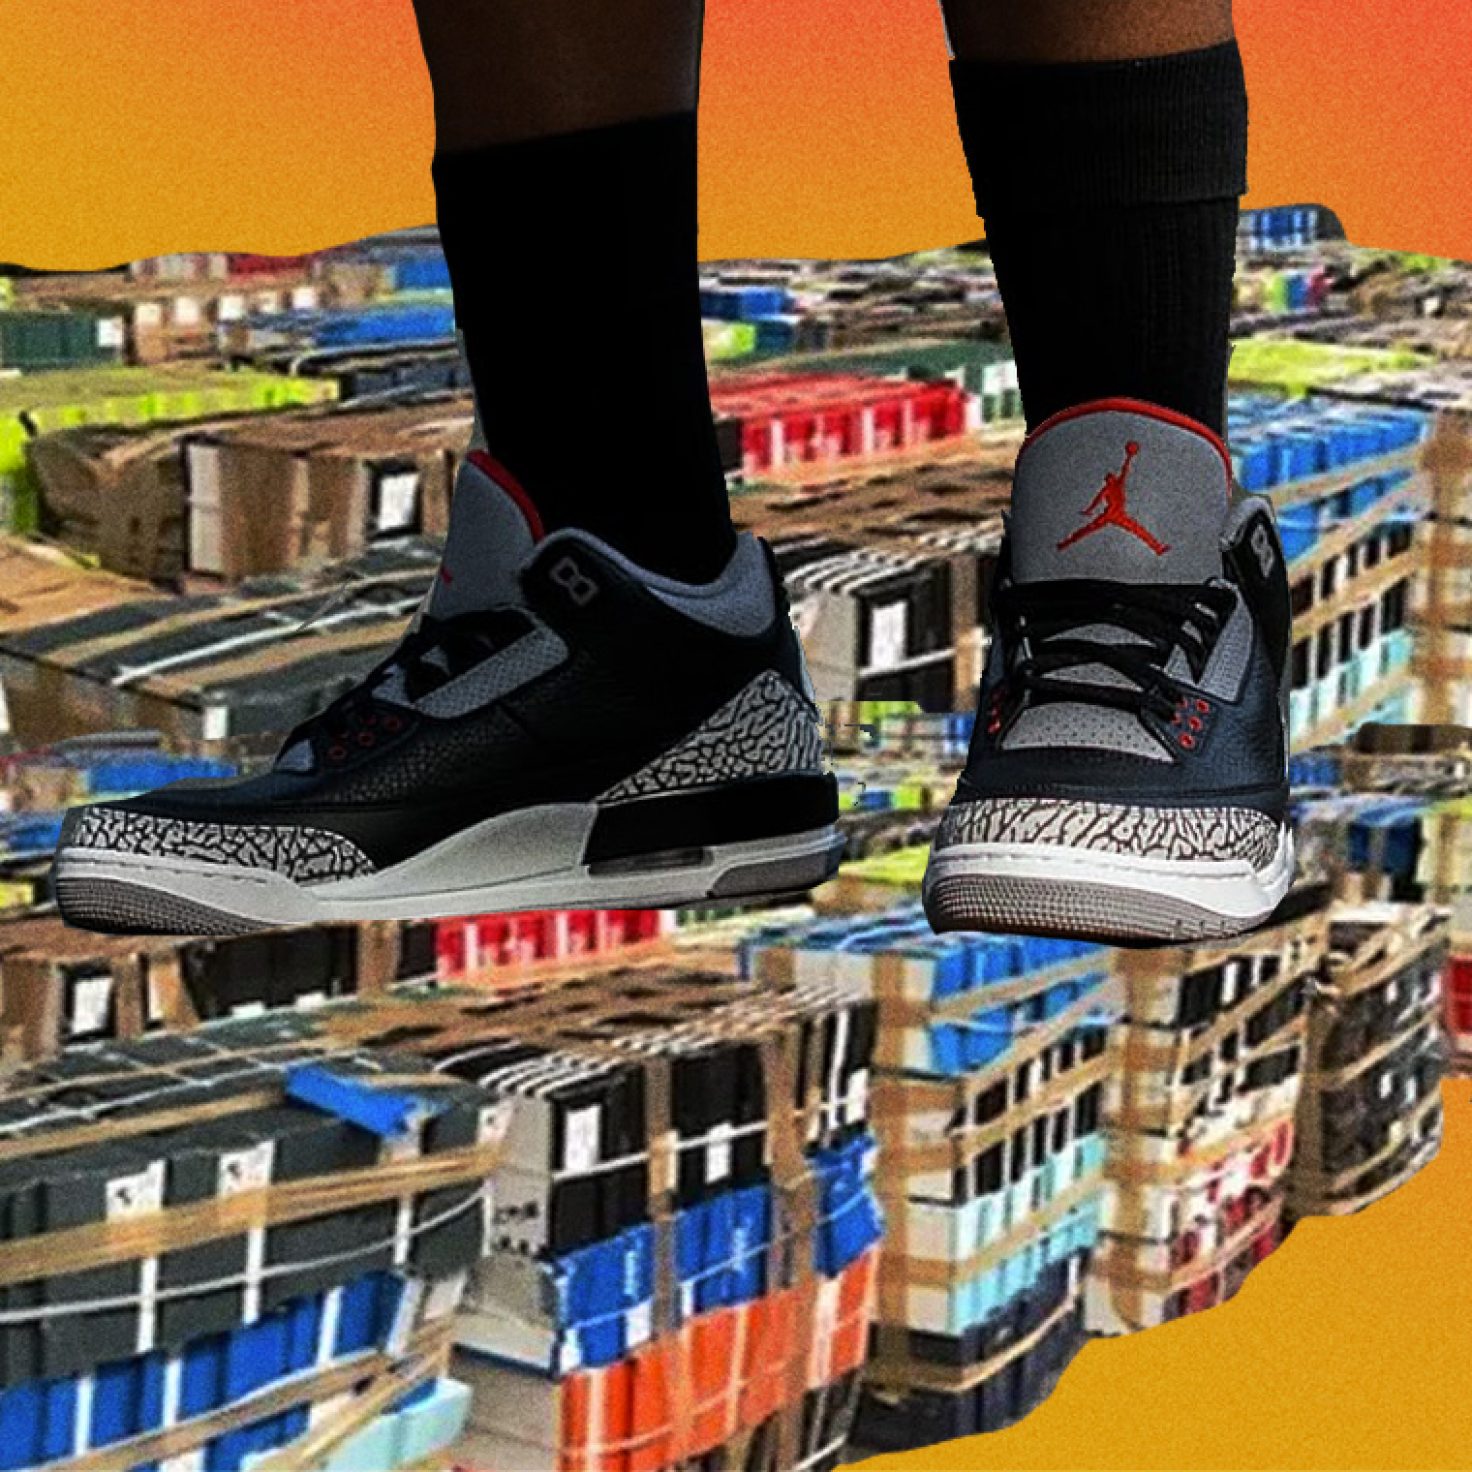 What It Was Like To Buy Jordans In Mexico Before Nafta